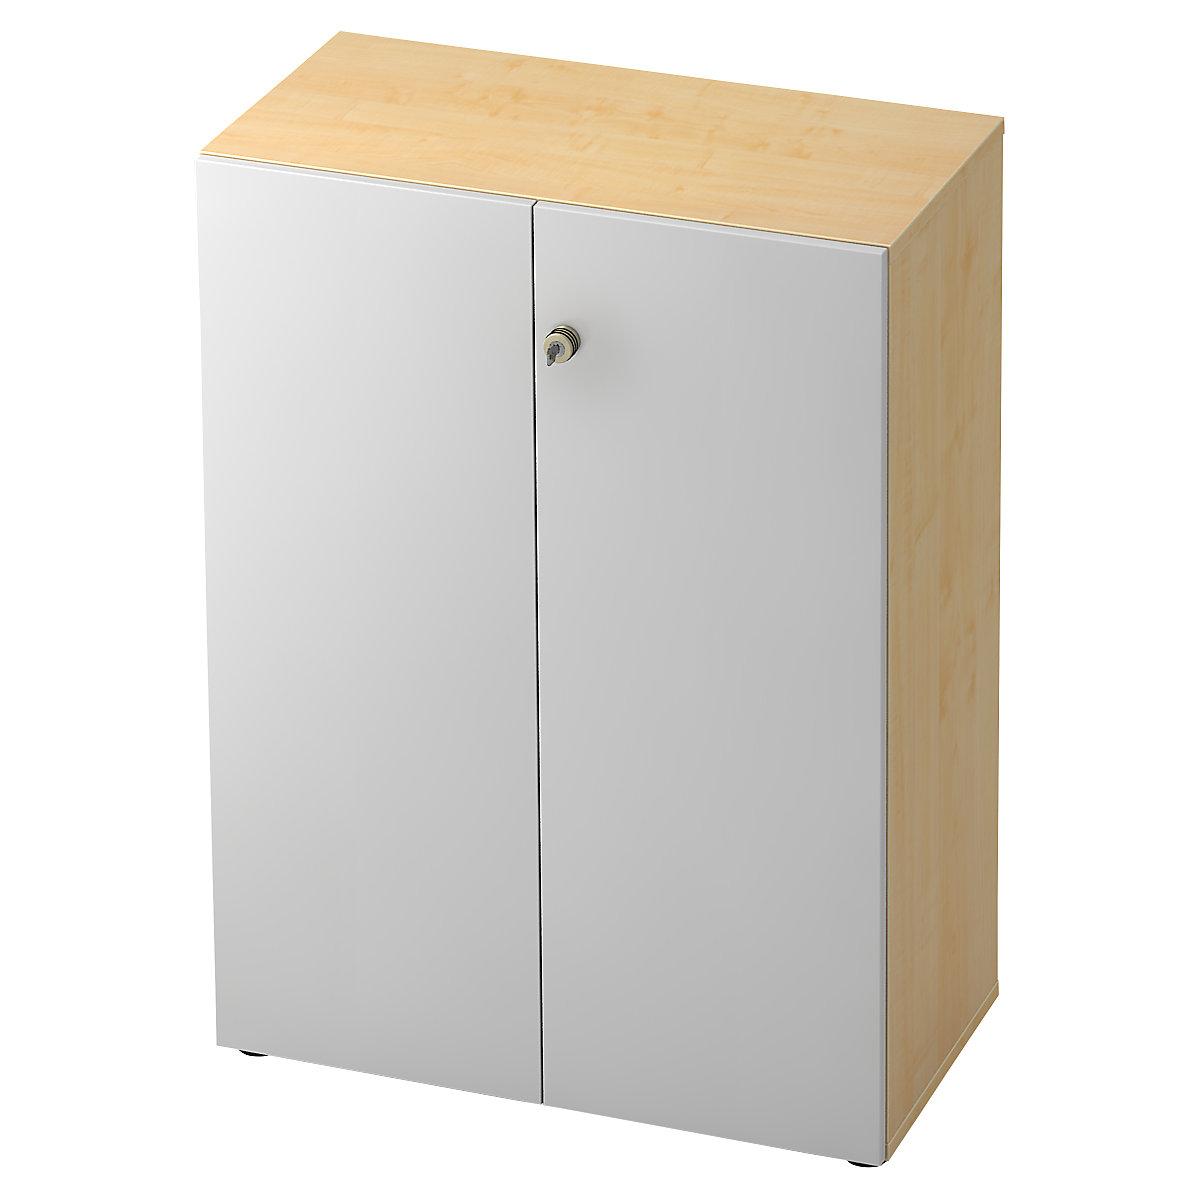 Filing cupboard with acoustic rear panel ANNY-AC, HxWxD 1100 x 800 x 420 mm, 2 shelves, maple finish-8